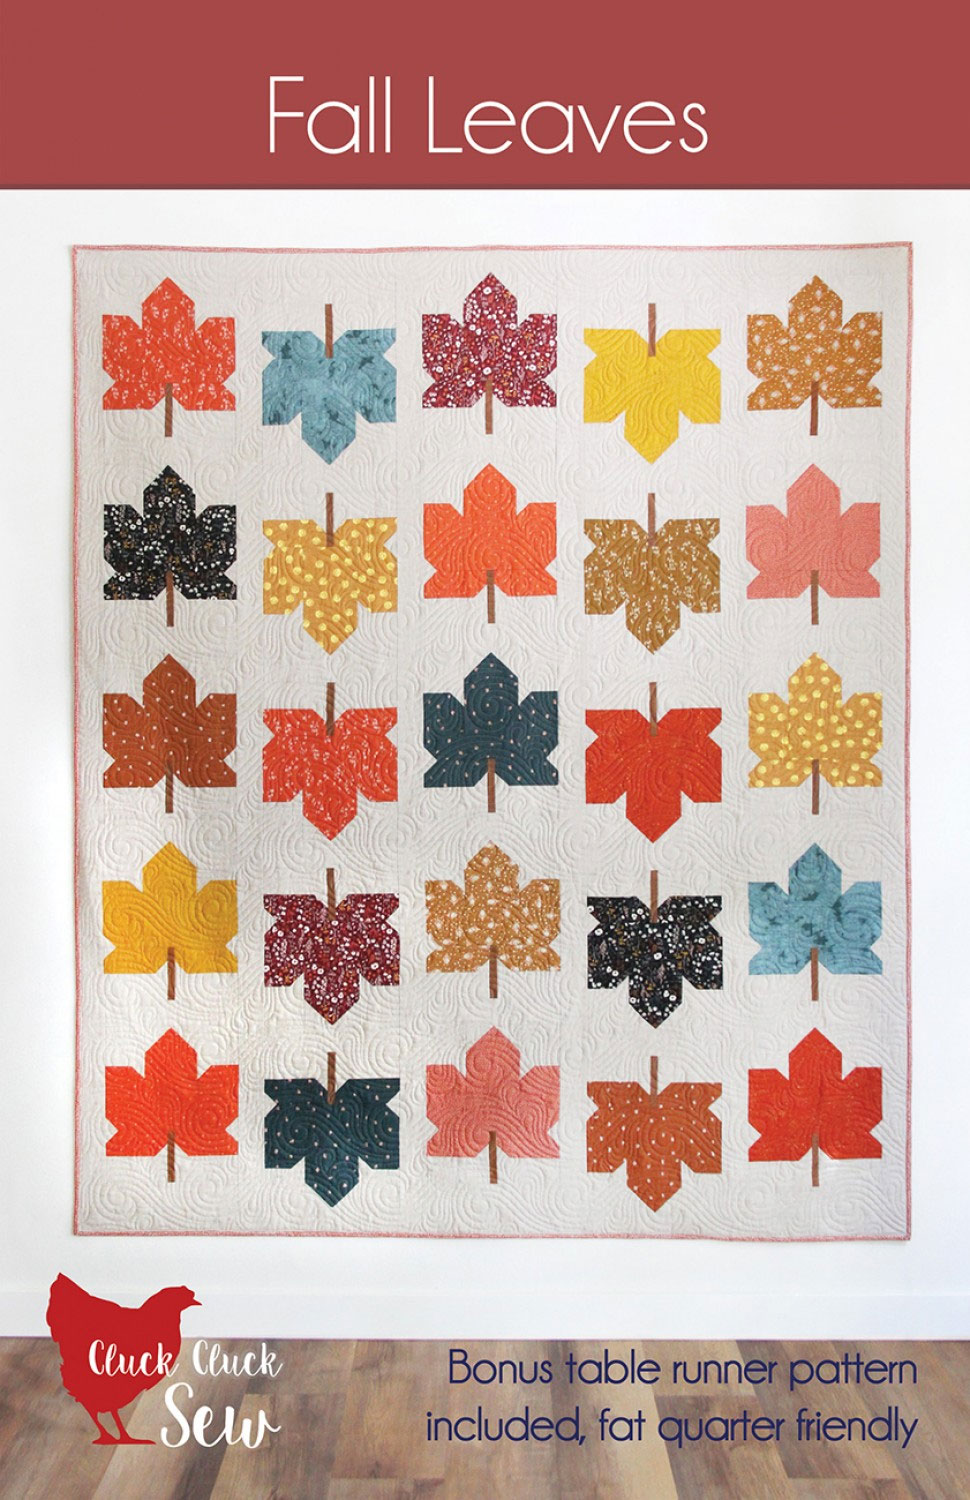 Fall-Leaves-quilt-sewing-pattern-Cluck-Cluck-Sew-front